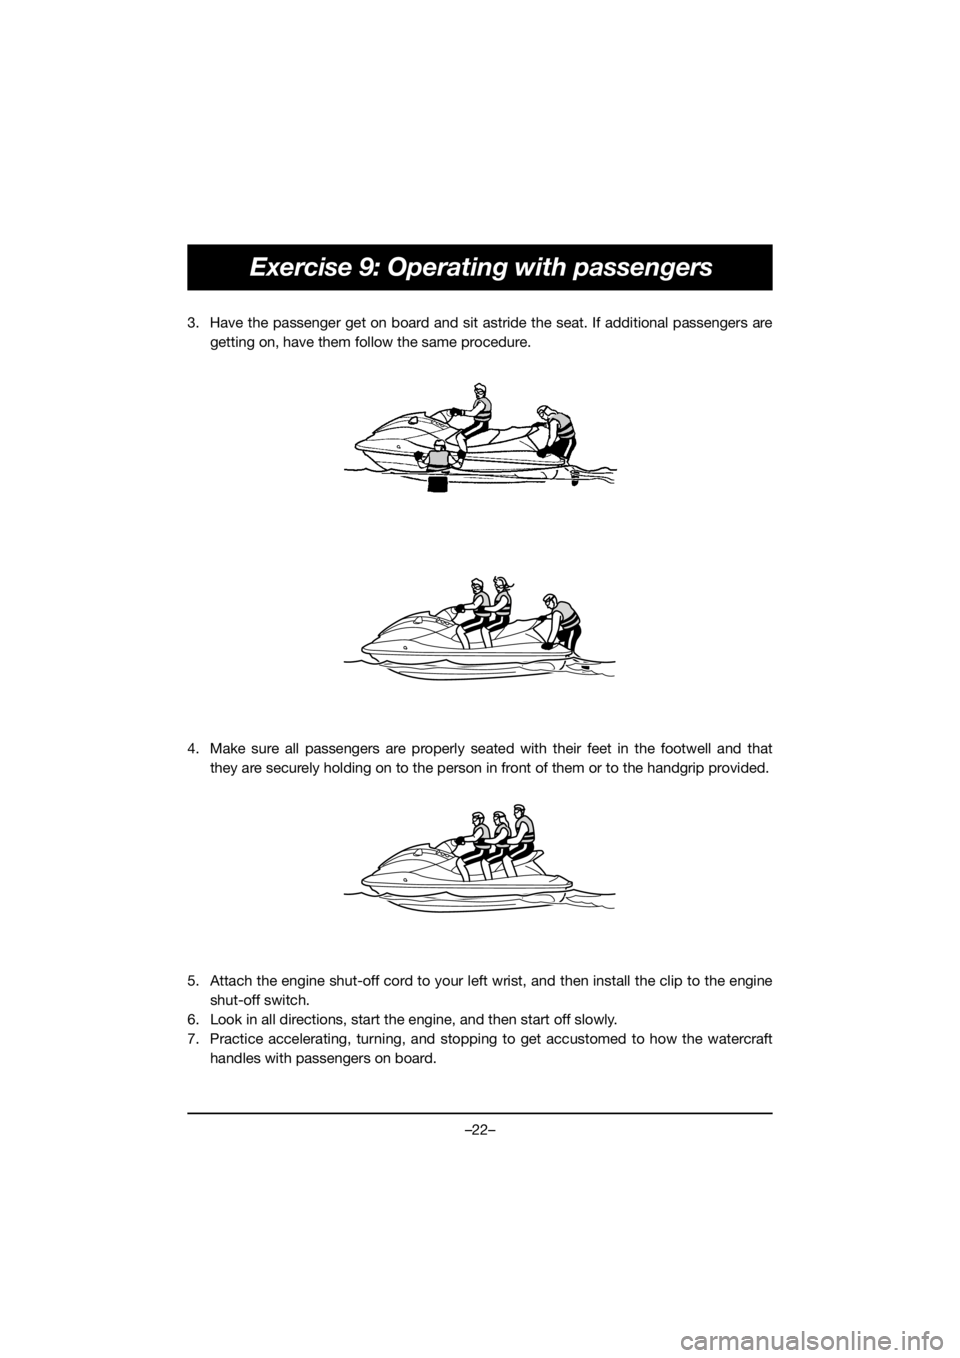 YAMAHA EX SPORT 2020 User Guide –22–
Exercise 9: Operating with passengers
3. Have the passenger get on board and sit astride the seat. If additional passengers are
getting on, have them follow the same procedure. 
4. Make sure 